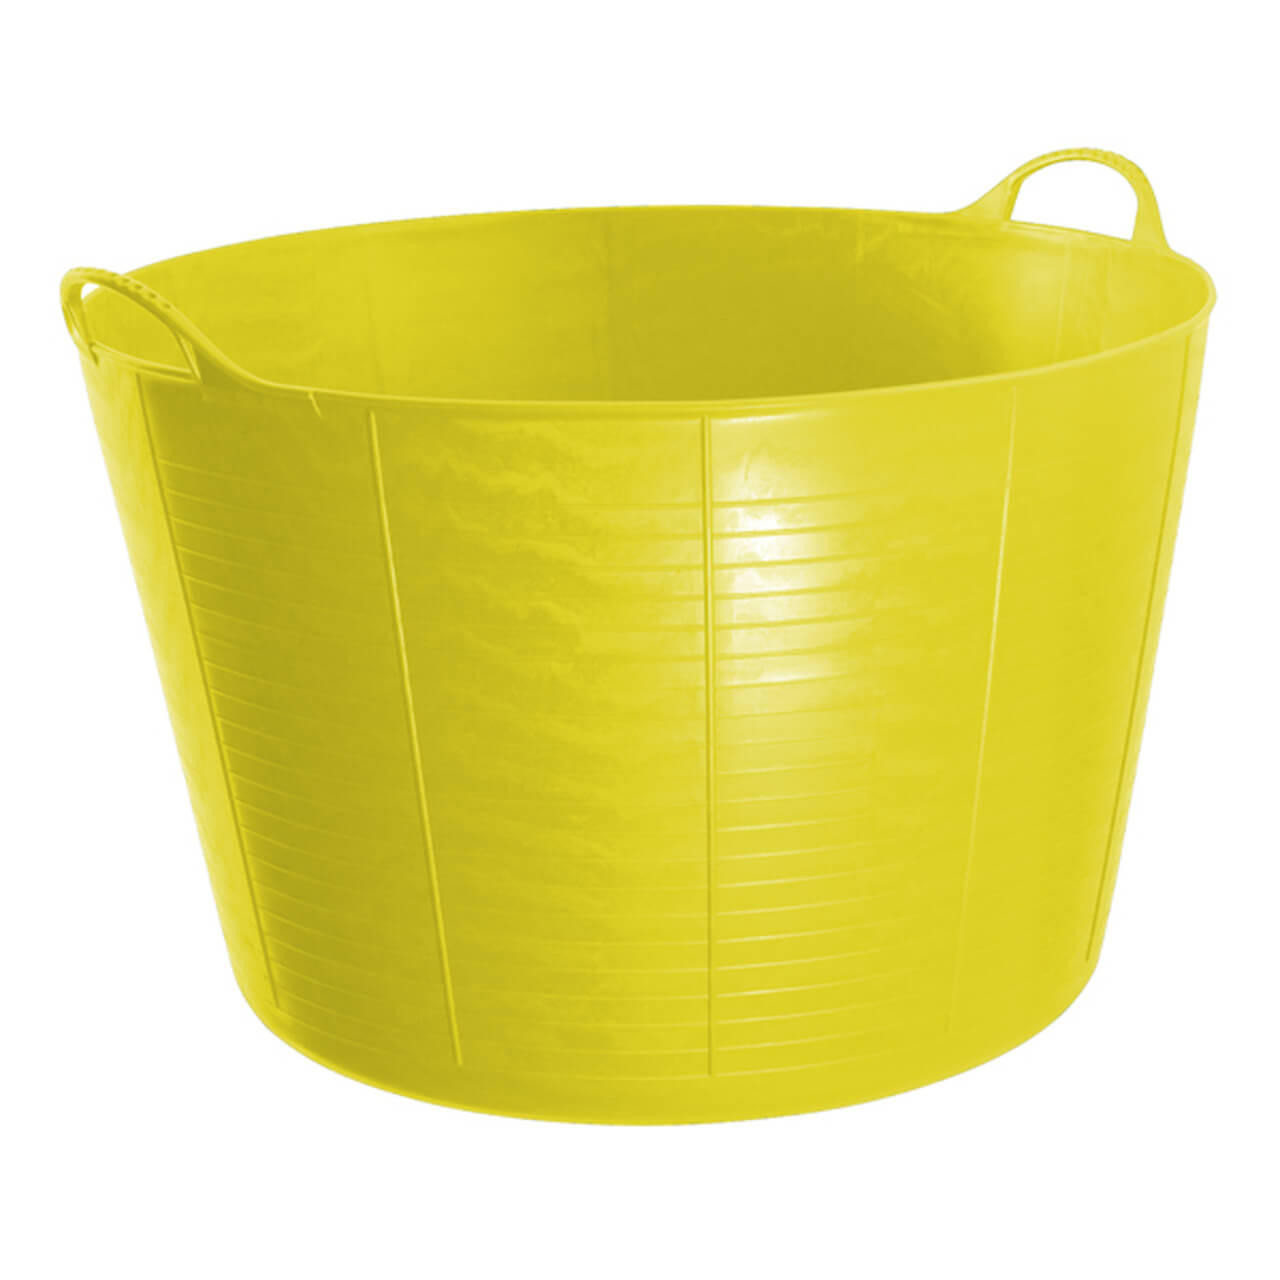 Red Gorilla Gorilla Tub Extra Large 580X370MM 75L Yellow Extra Large SP75Y